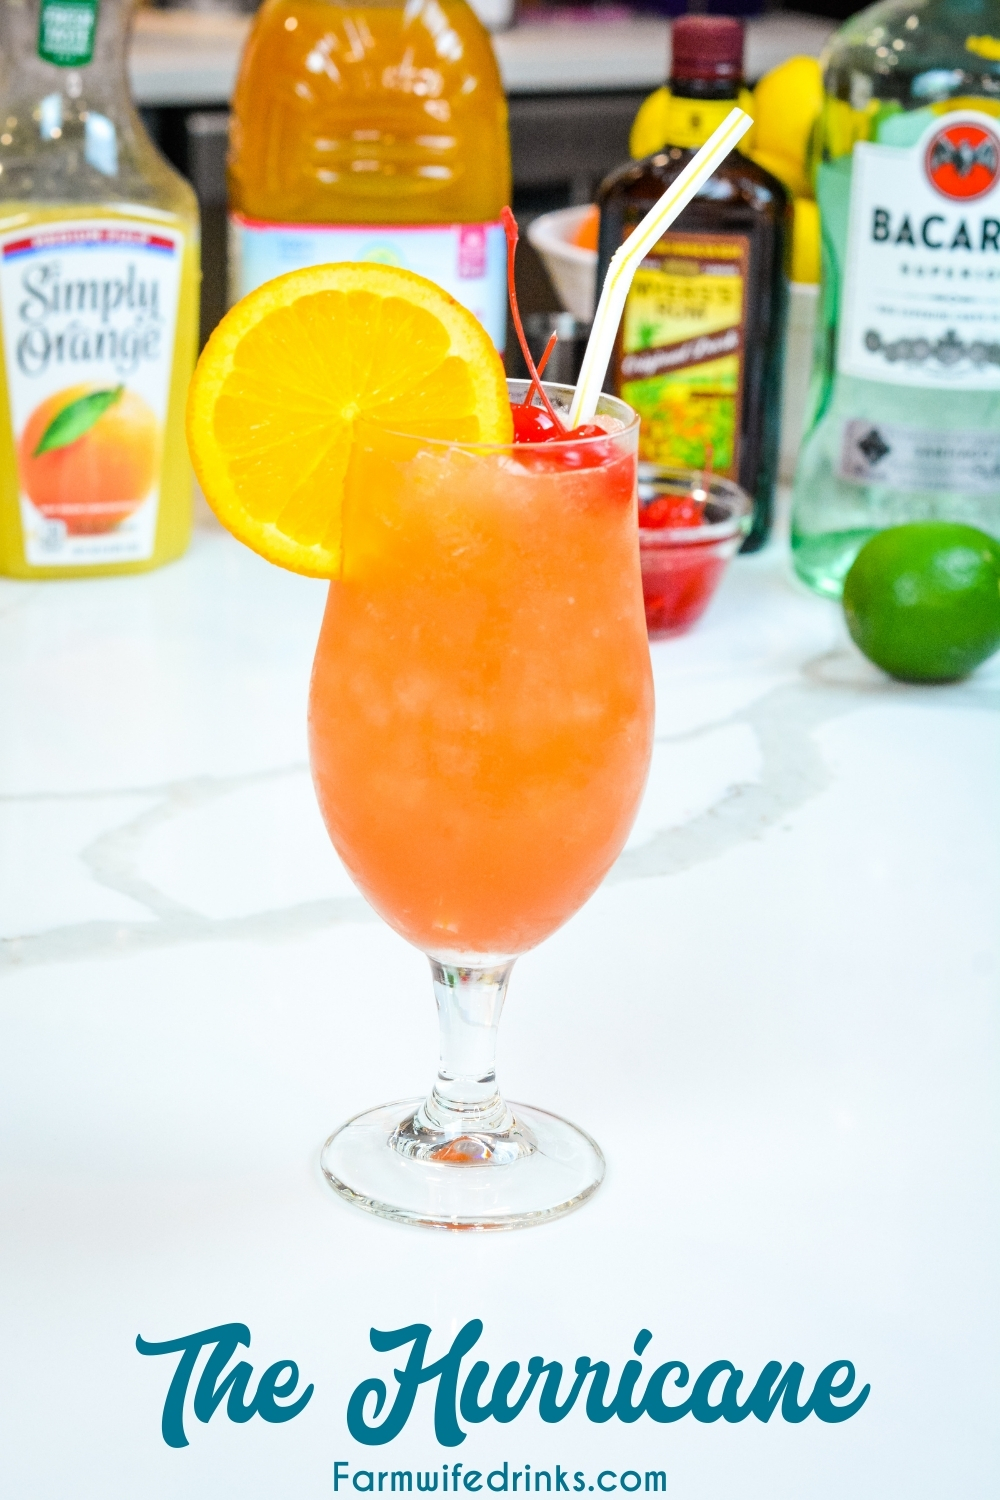 The New Orleans Hurrican Drink can be made at home with light and dark rum, passion fruit juice, orange juice, and grenadine. Top it off with a simple orange slice and maraschino cherries.